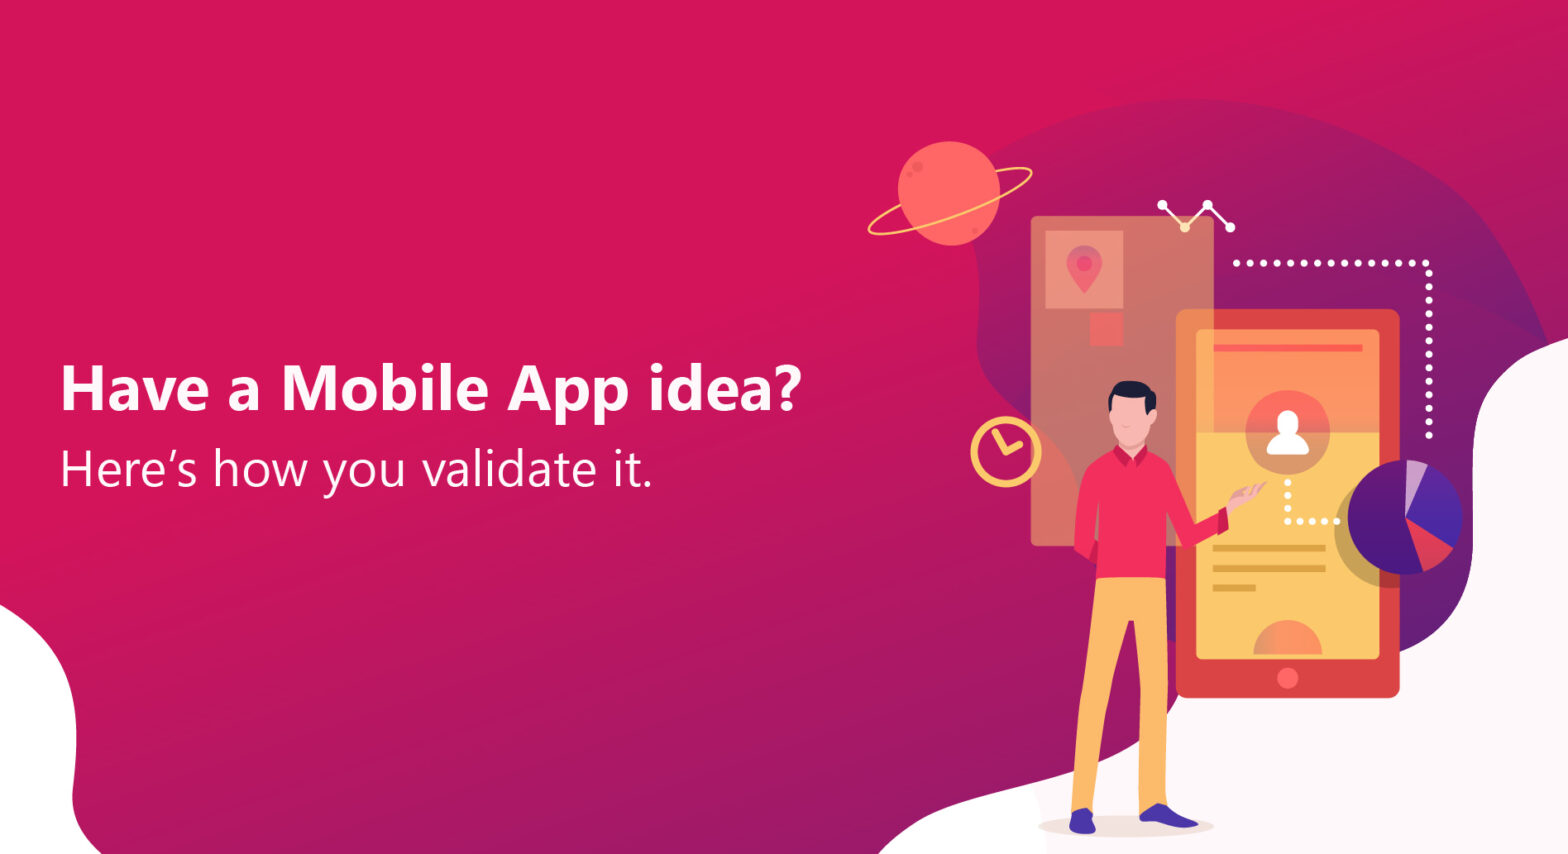 Have a Mobile App Idea? Here’s How You Can Validate It